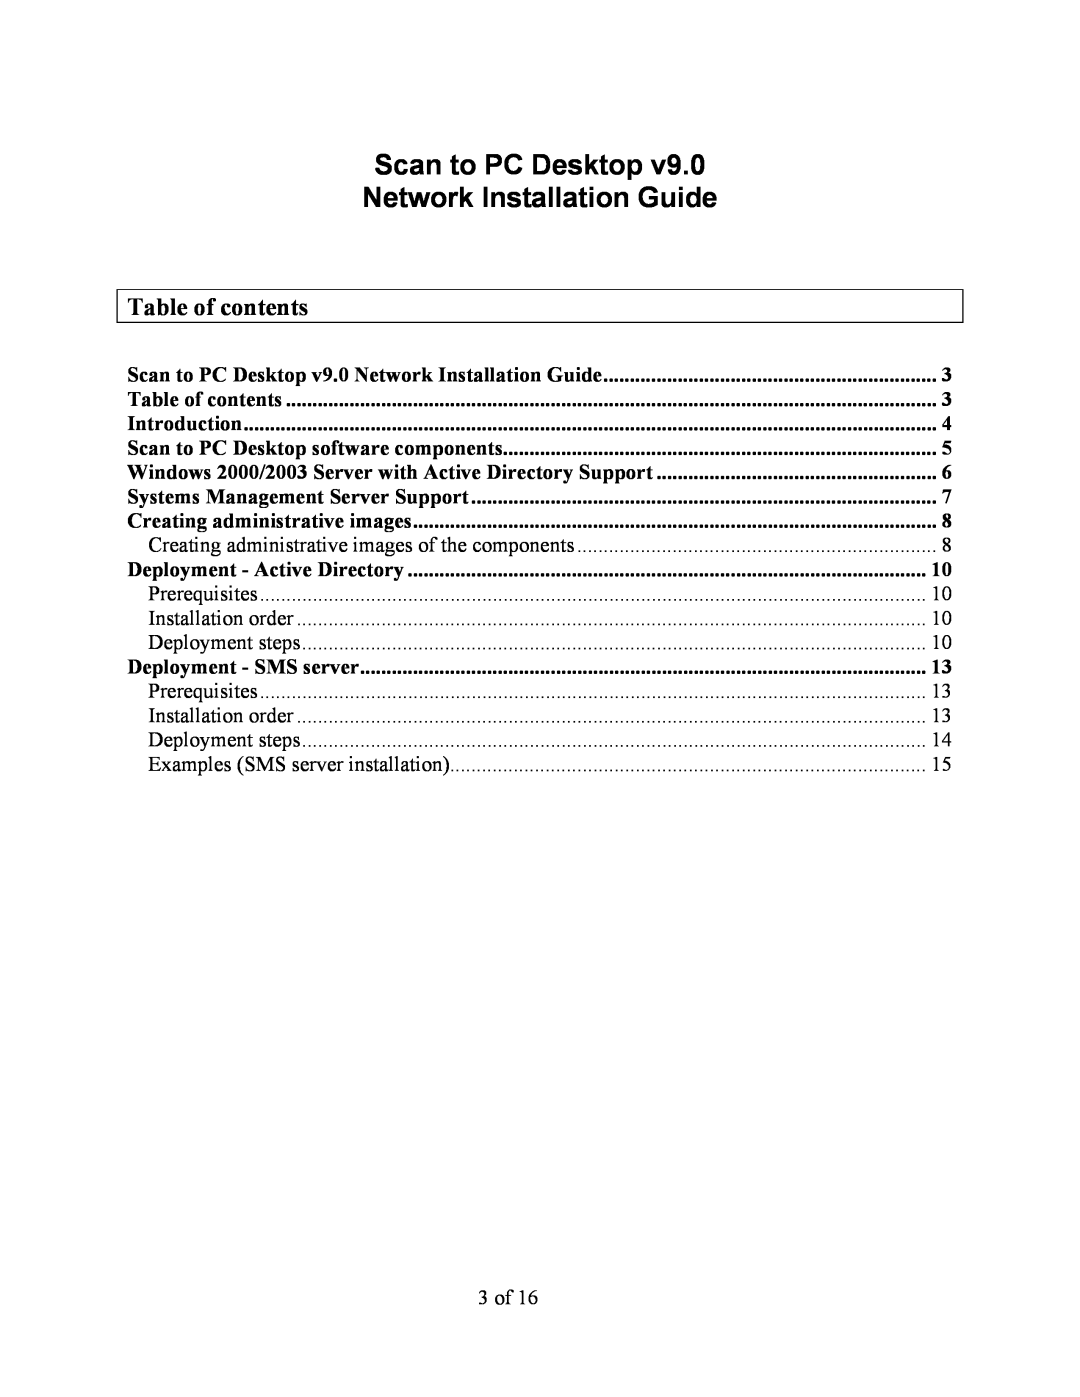 Xerox V9.0 manual Table of contents, Scan to PC Desktop Network Installation Guide 